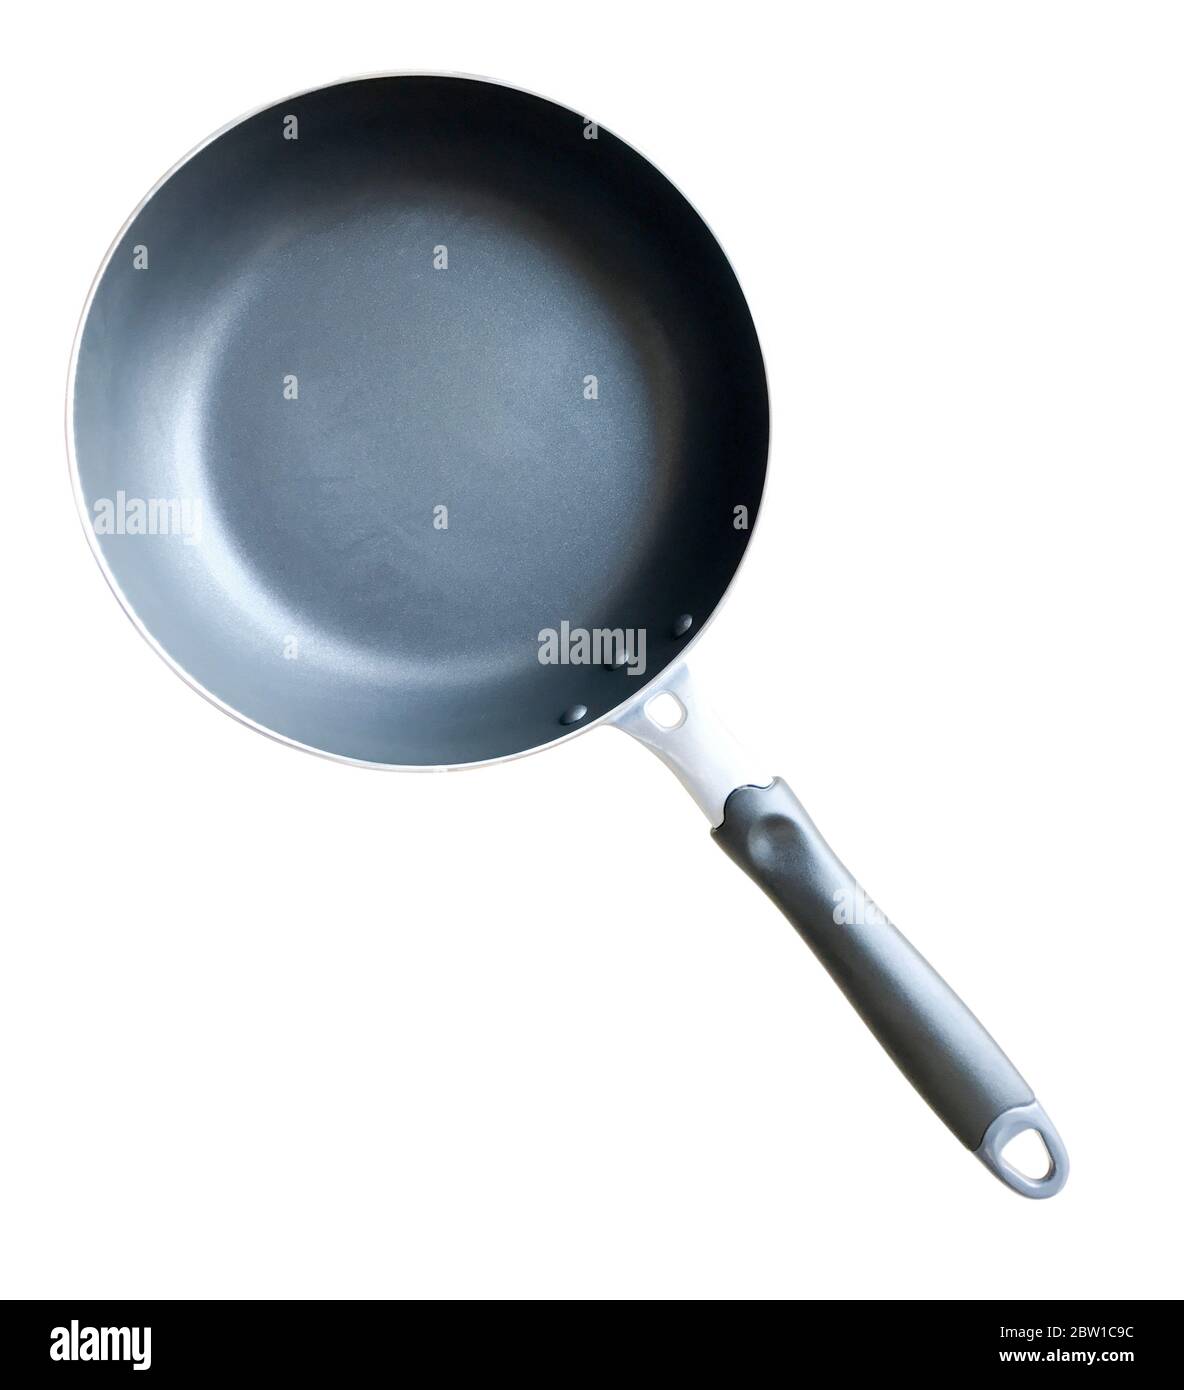 https://c8.alamy.com/comp/2BW1C9C/metal-black-frying-pan-with-a-non-stick-coating-composition-isolated-over-the-white-background-2BW1C9C.jpg